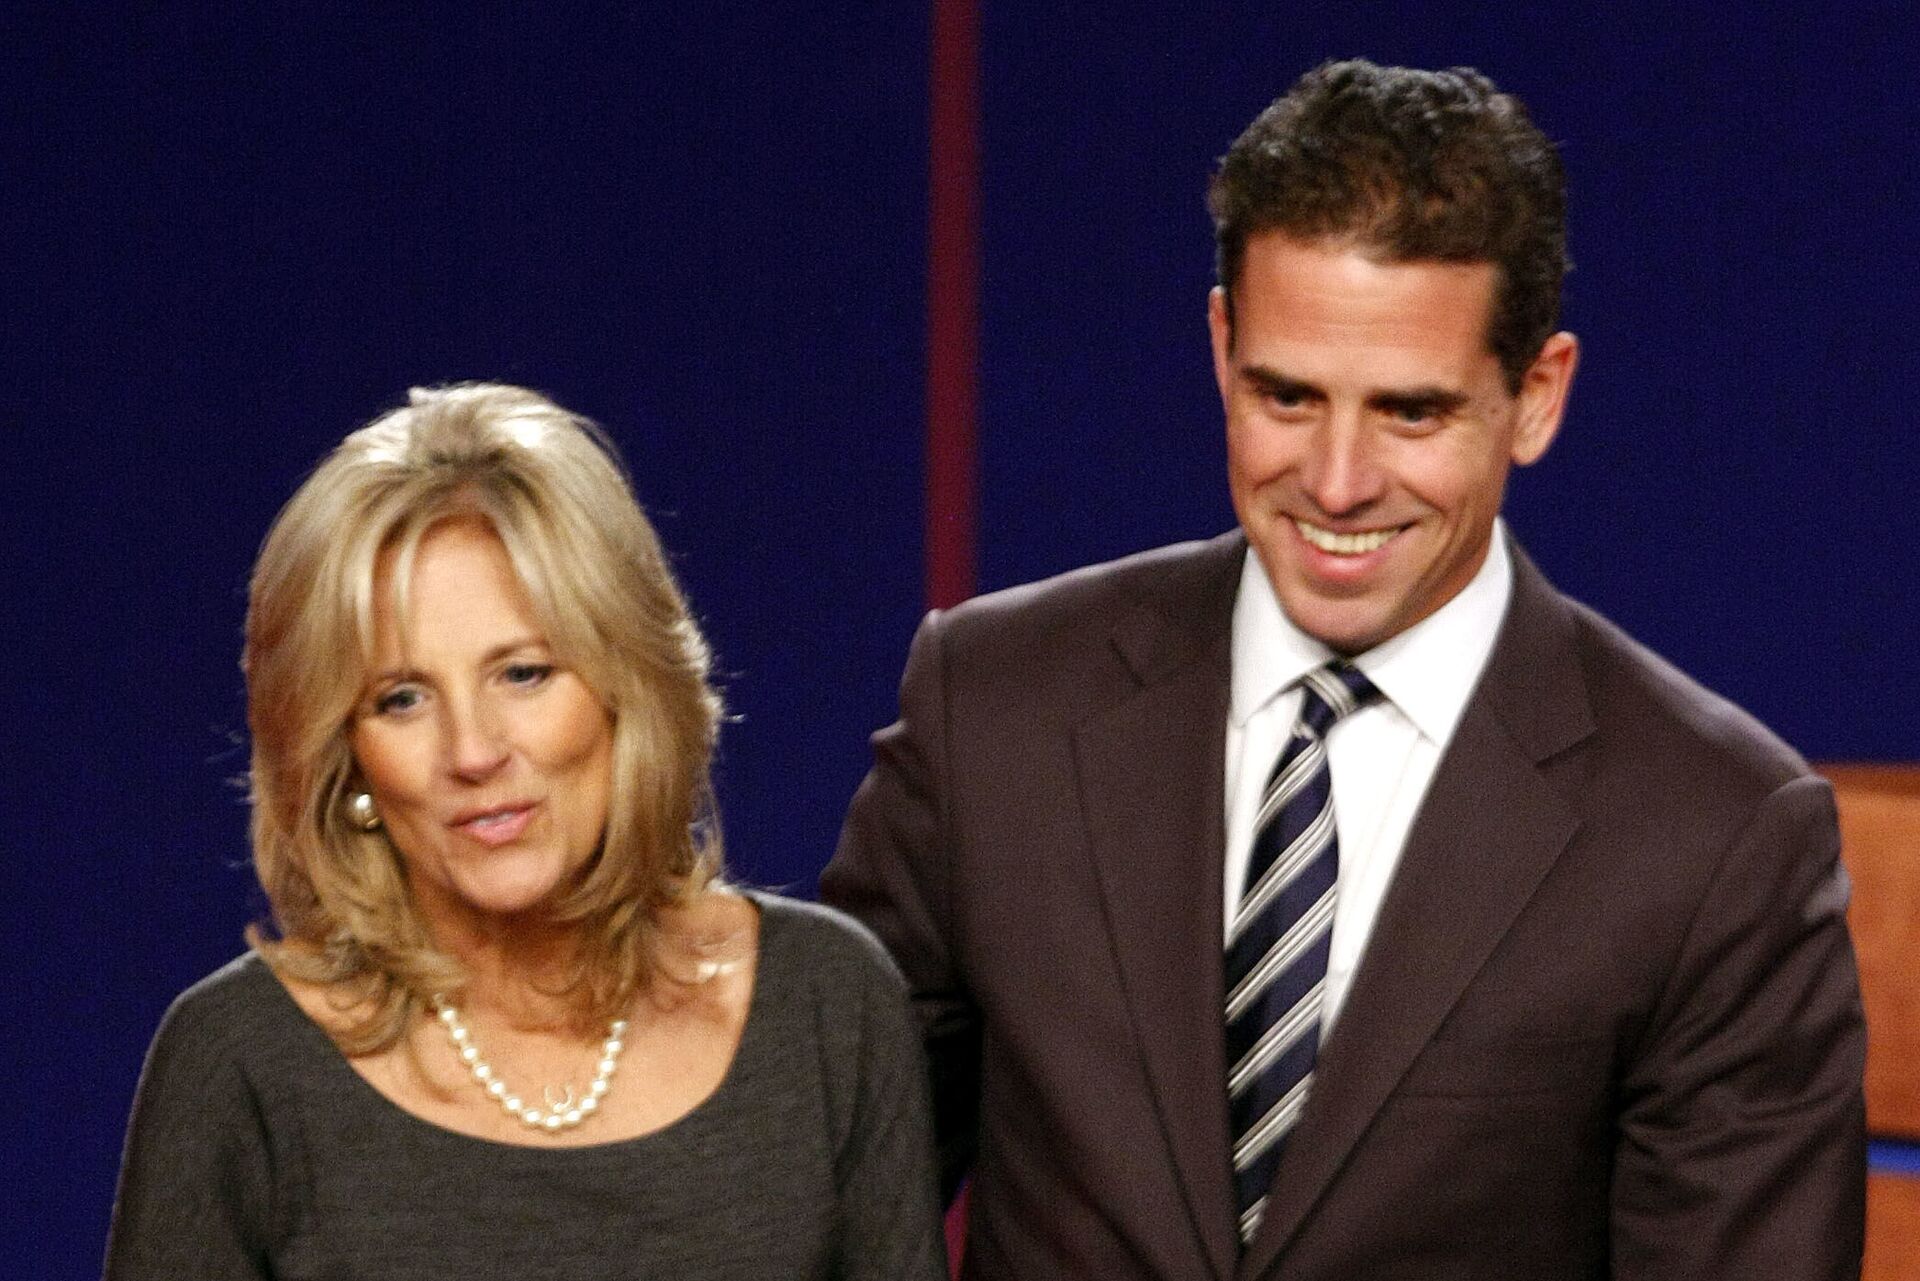 Hunter Biden, right, and his stepmother Jill Biden on stage after the vice presidential debate at Washington University in St. Louis, Thursday, Oct. 2, 2008 - Sputnik International, 1920, 07.09.2021